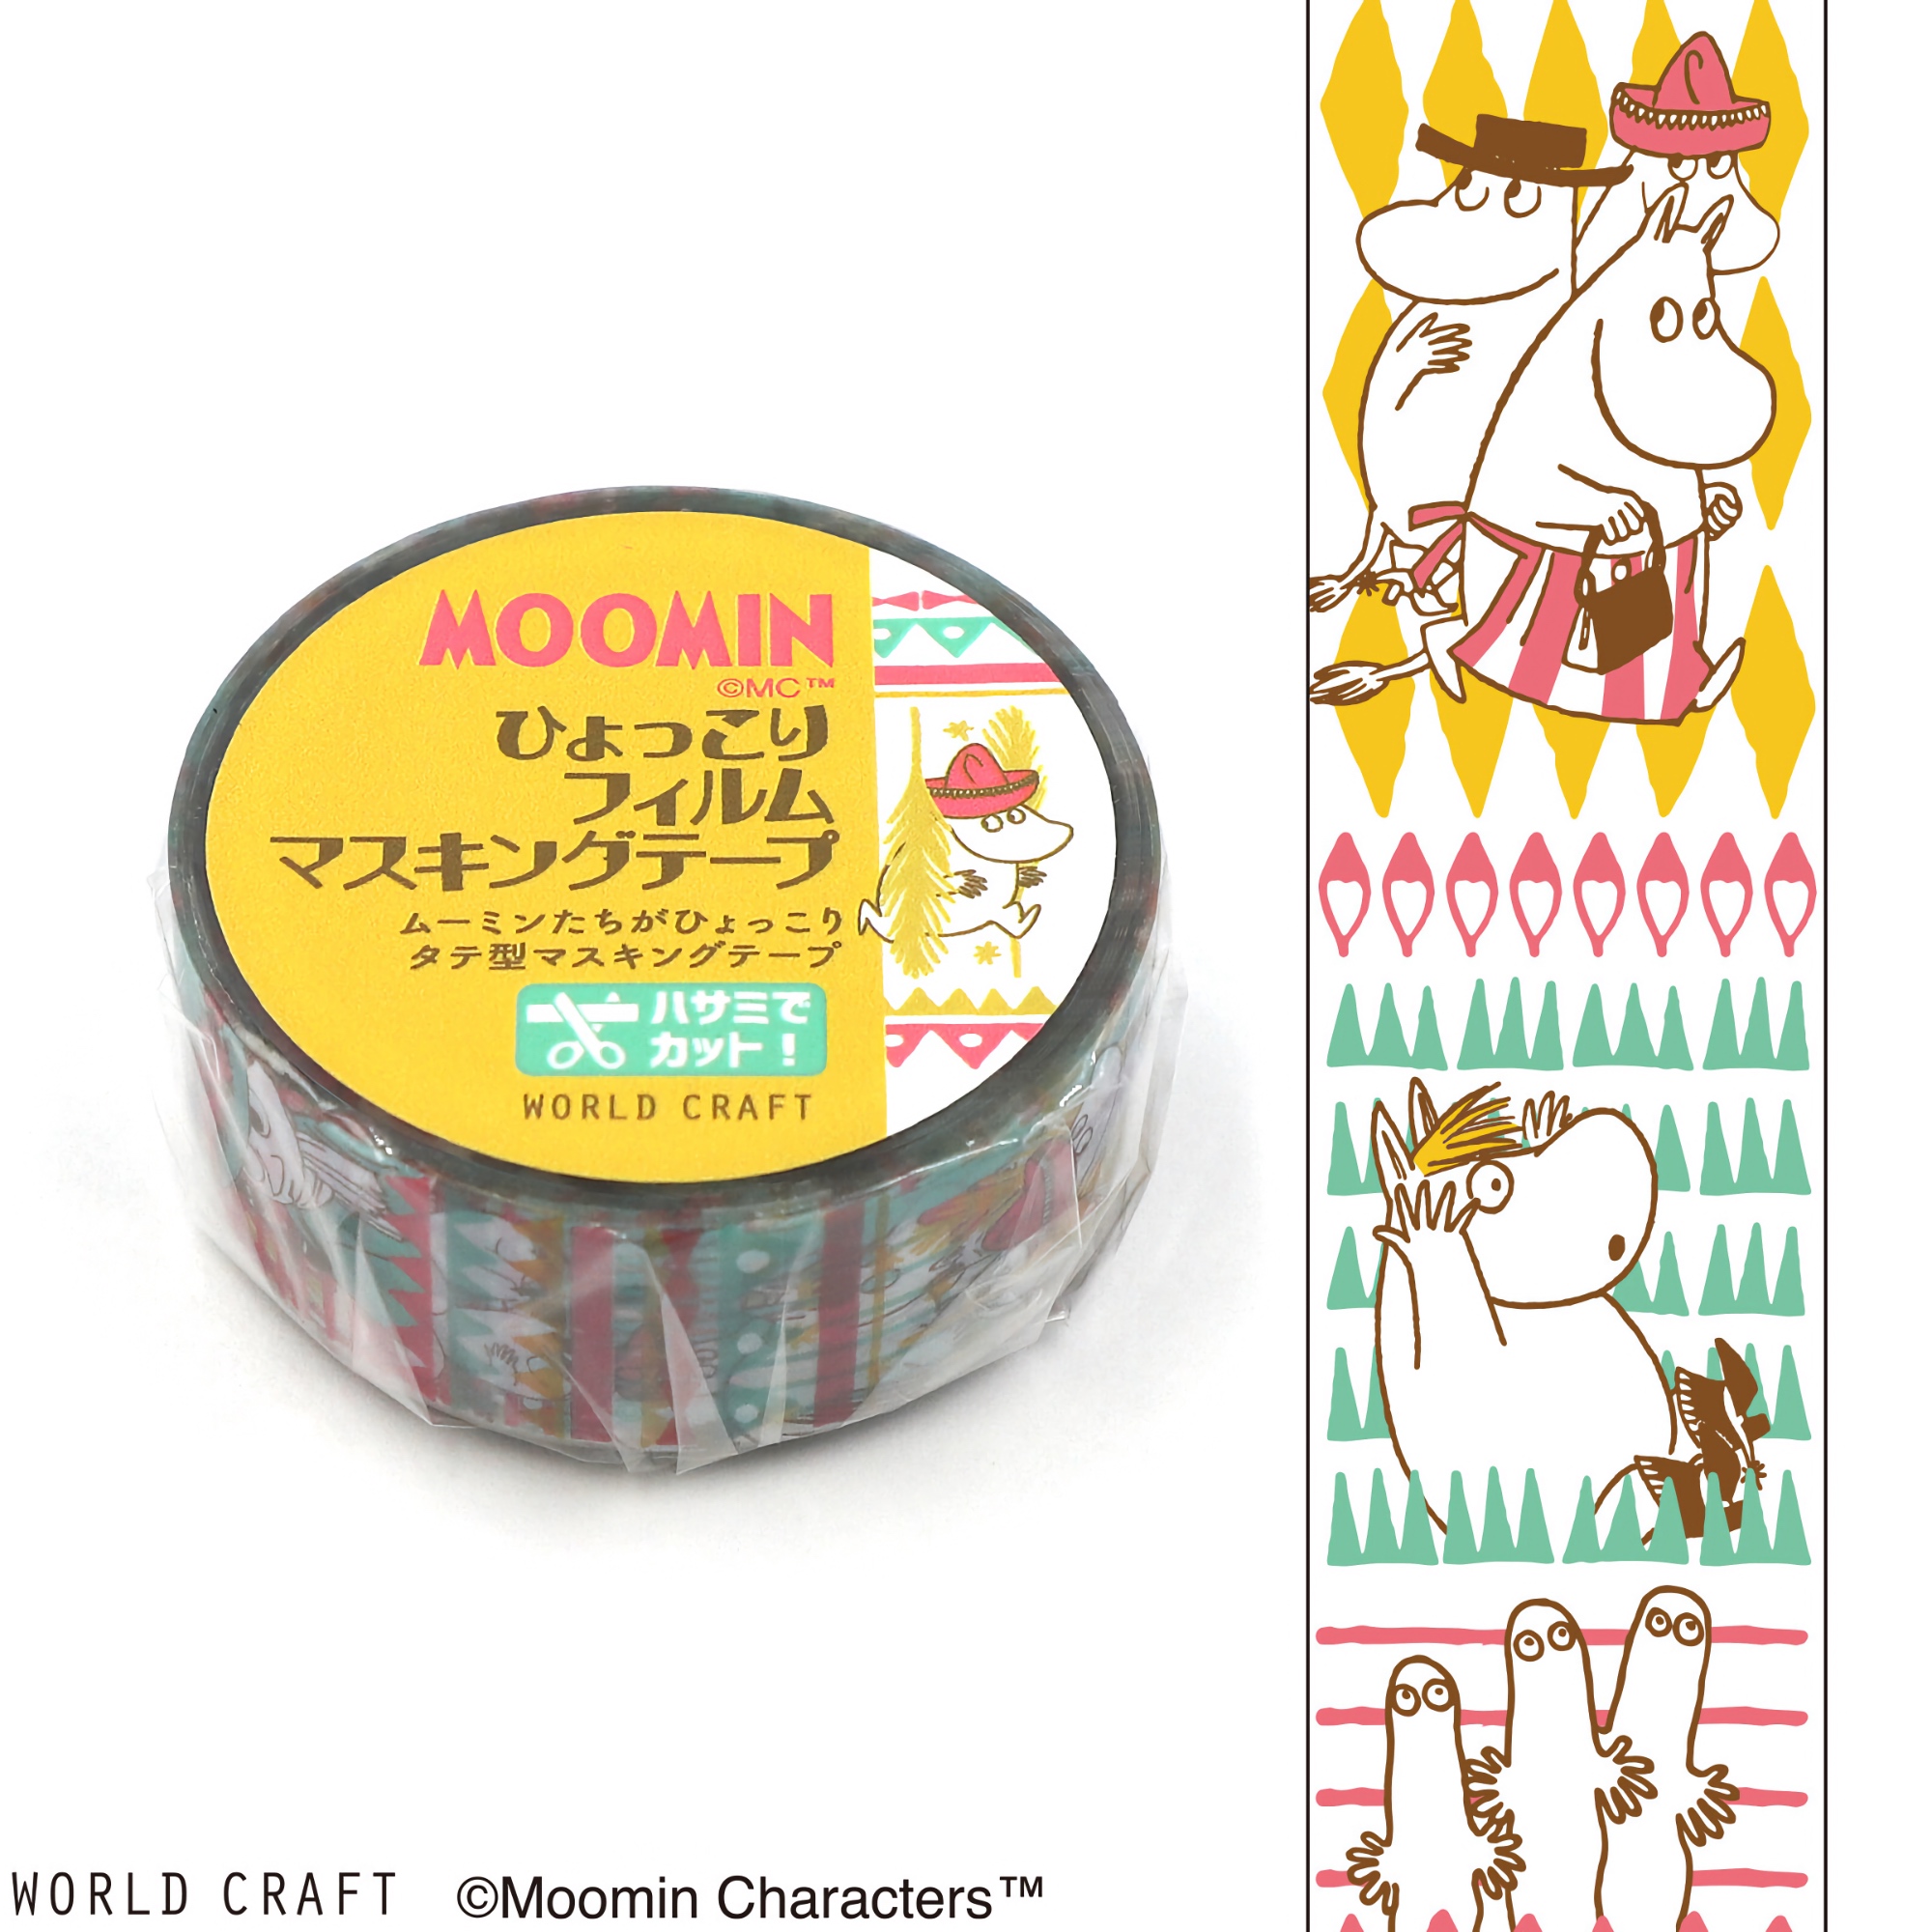 World Craft Clear PET Tape Moomin Going